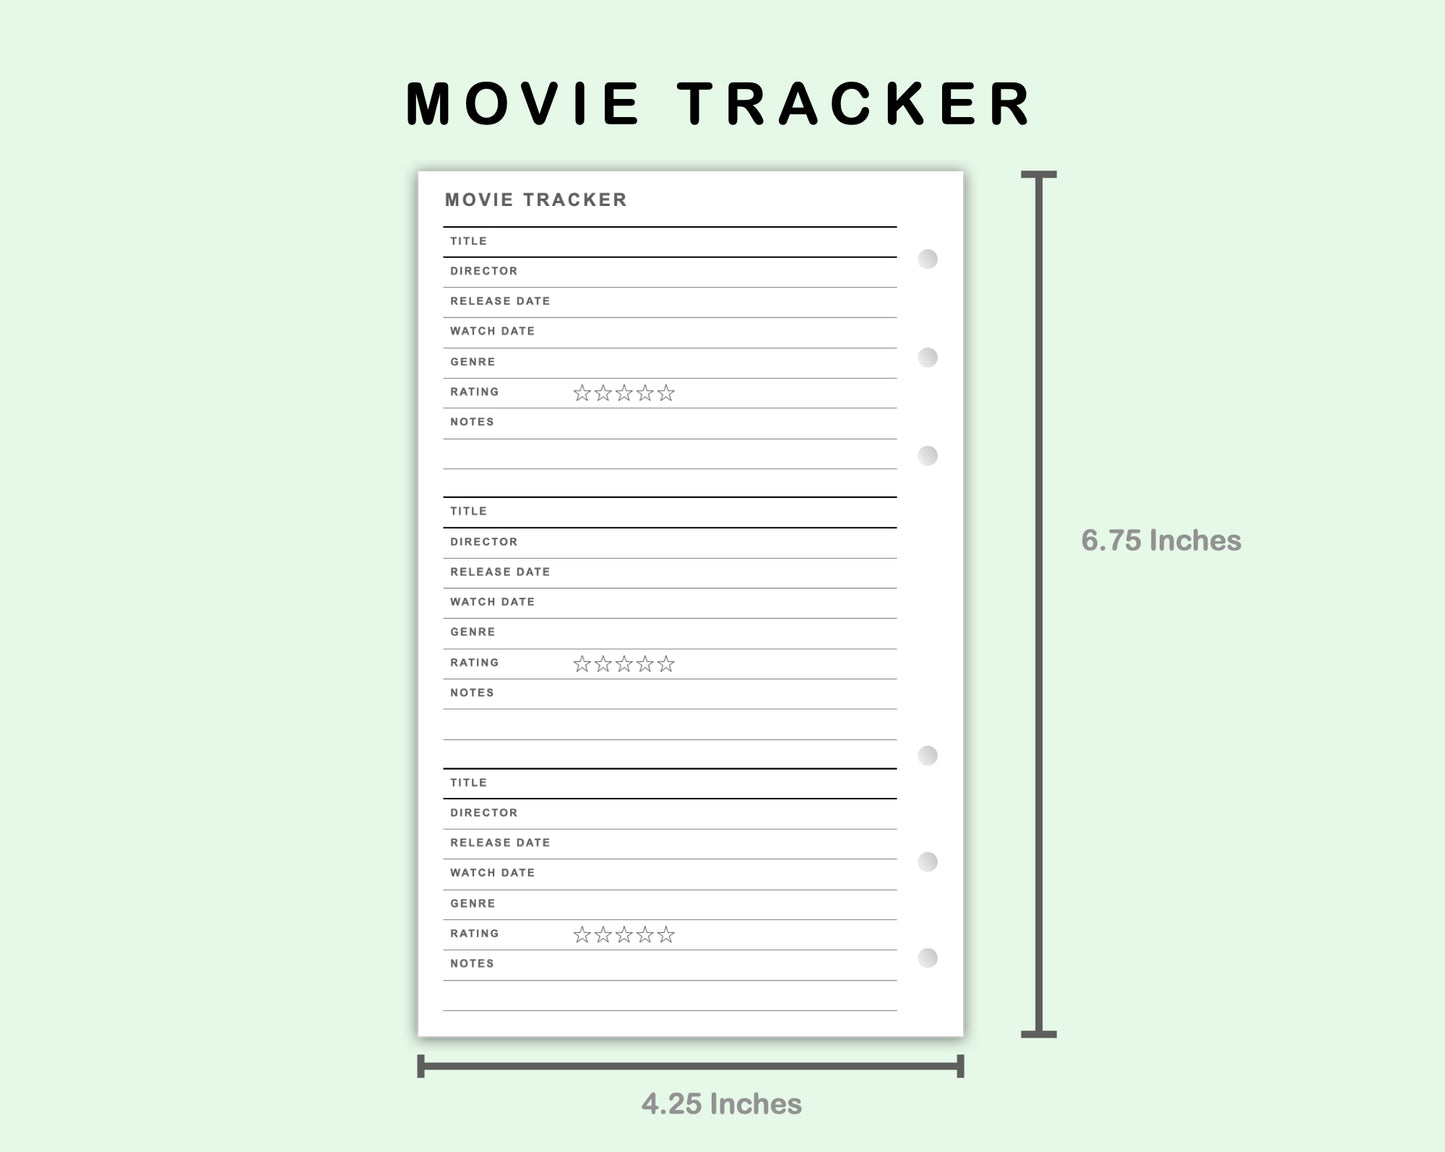 FC Compact Inserts - Movie Tracker